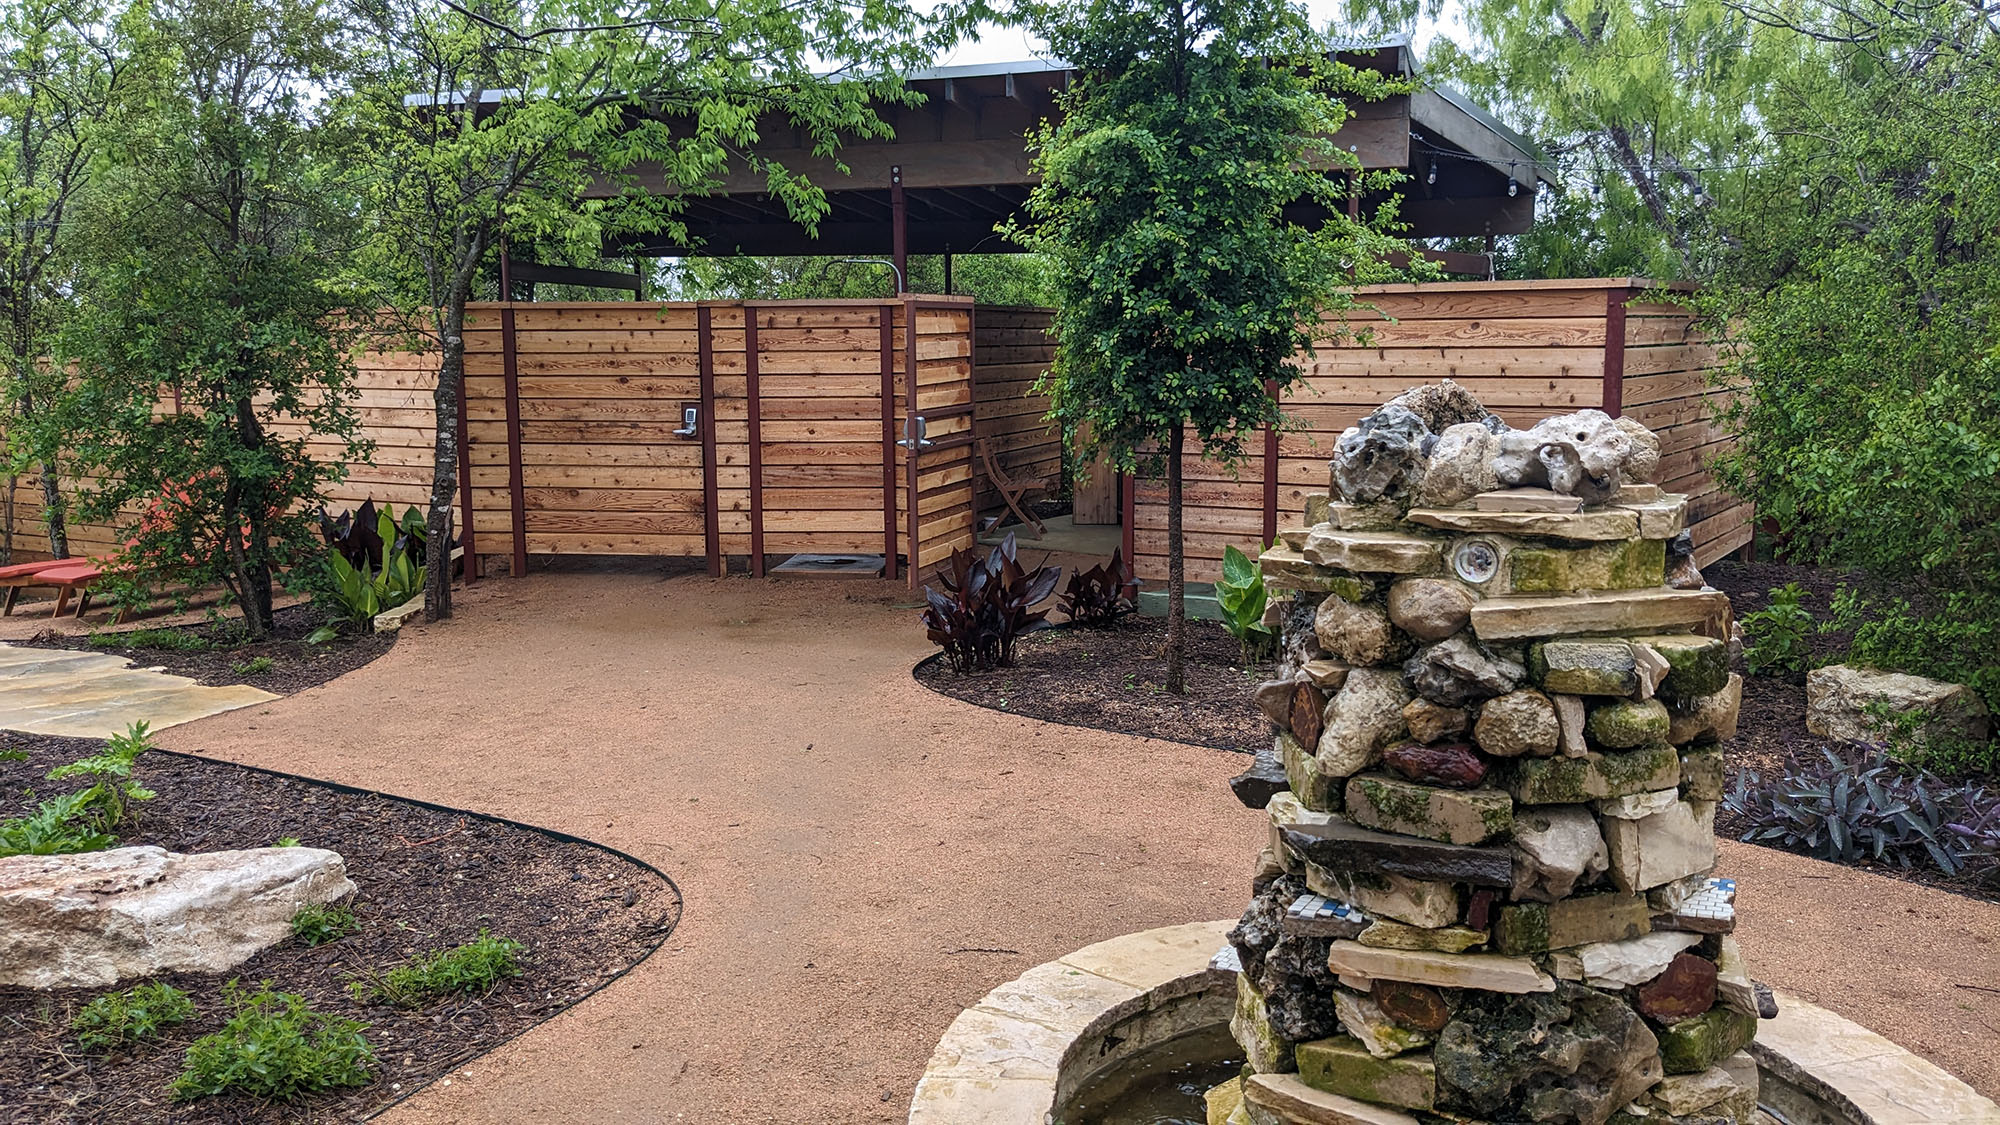 A winding path with small gardens on the left and right leads to the entrance, where horizontal wooden fencing hides the interior. A fountain made of slabs and rocks is in the foreground. 